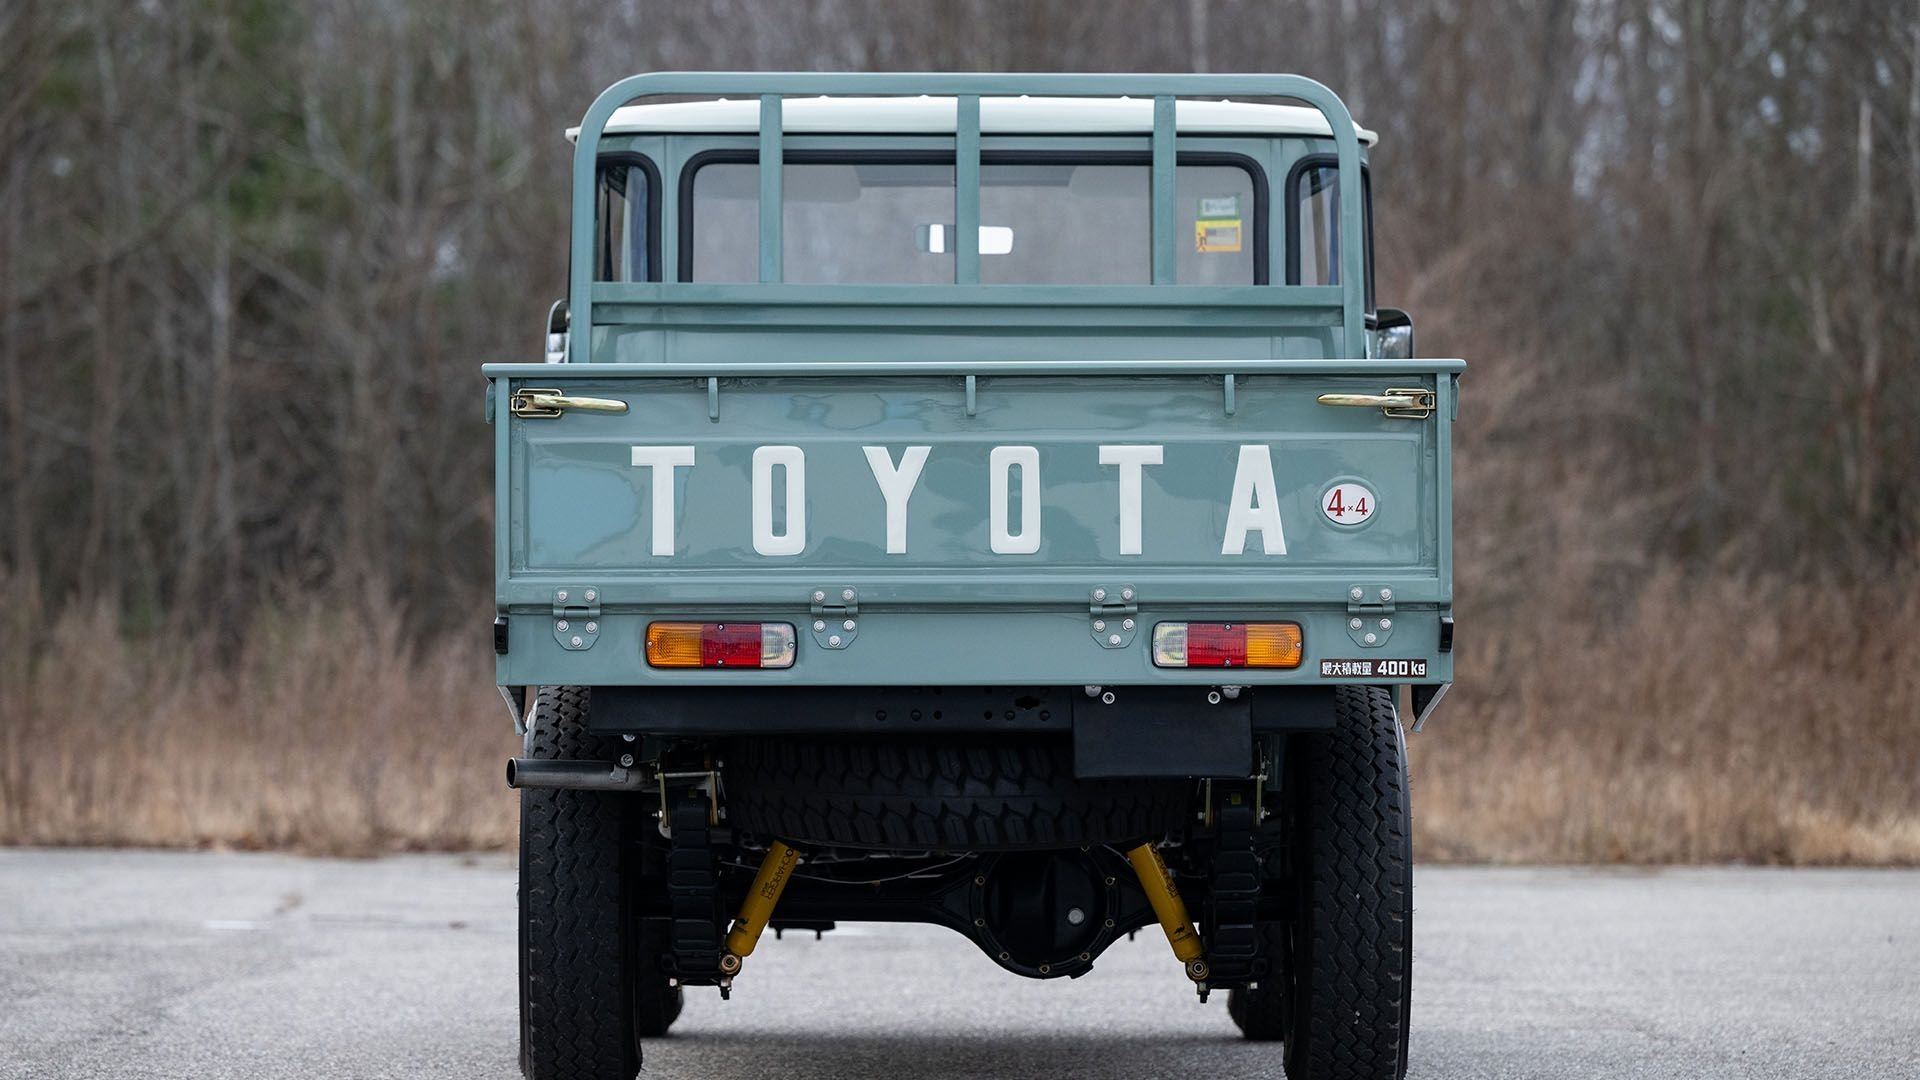 For Sale 1981 Toyota Land Cruiser Pickup